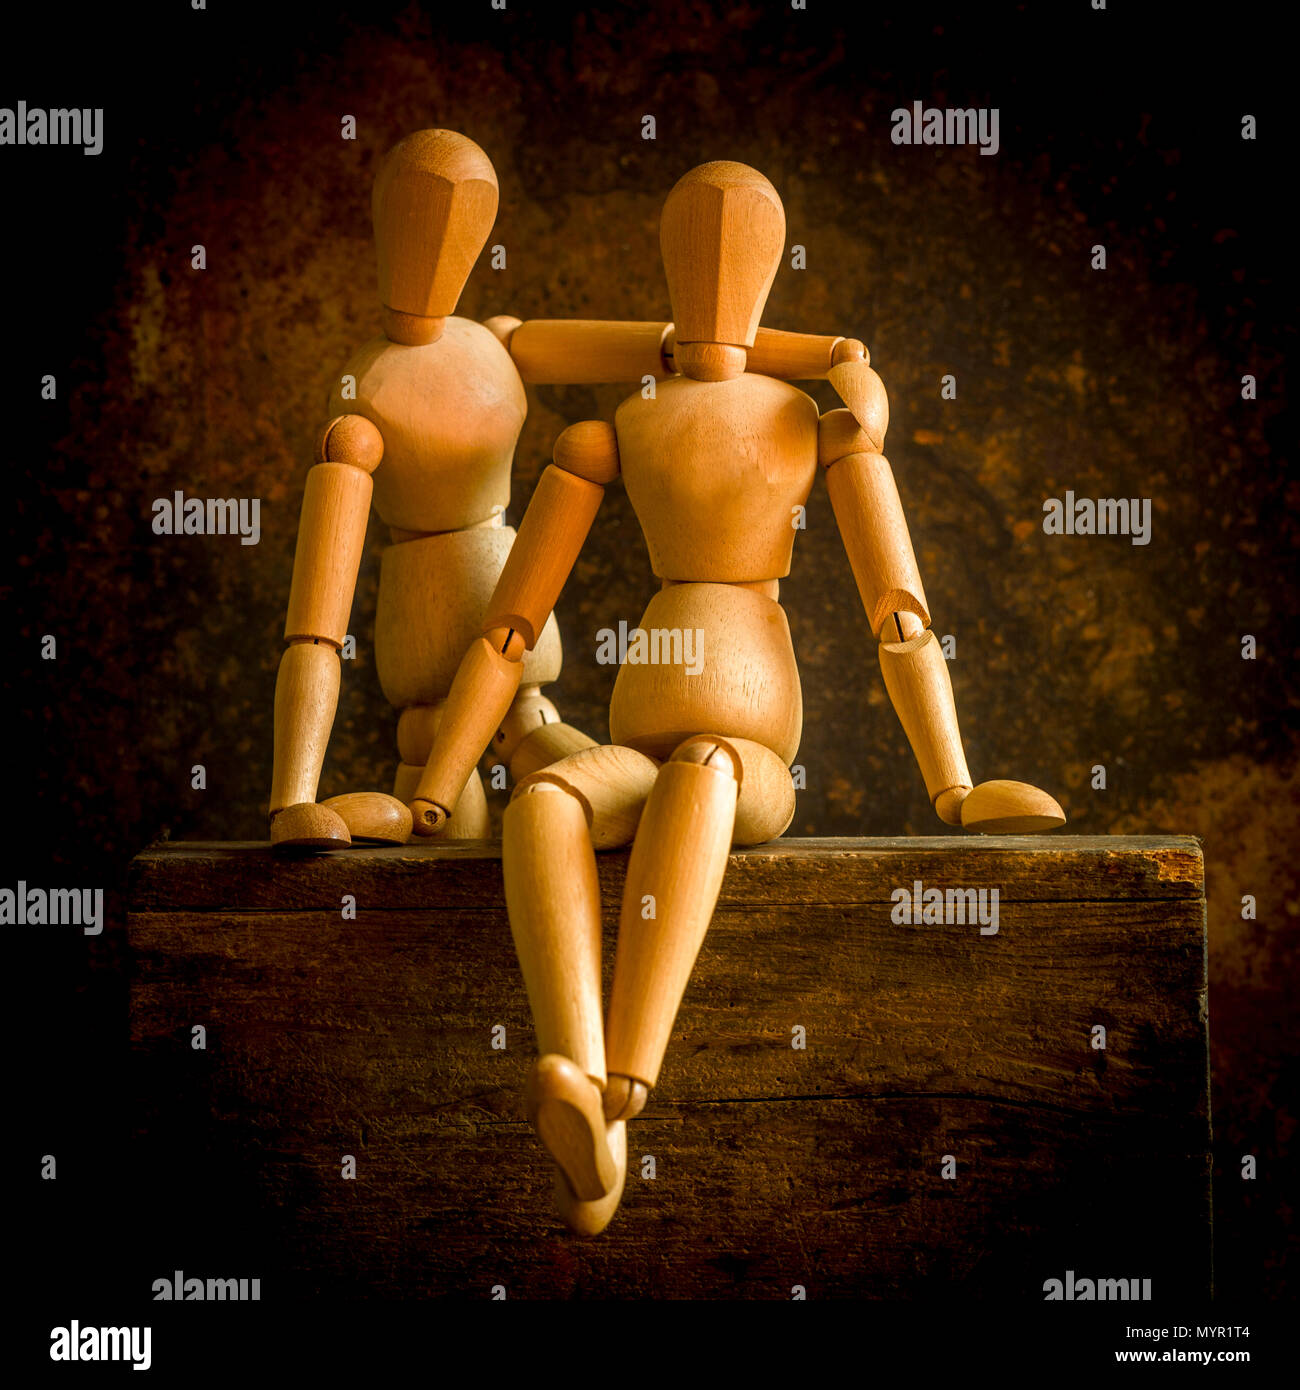 Mannequins on a wooden box, concept love Stock Photo